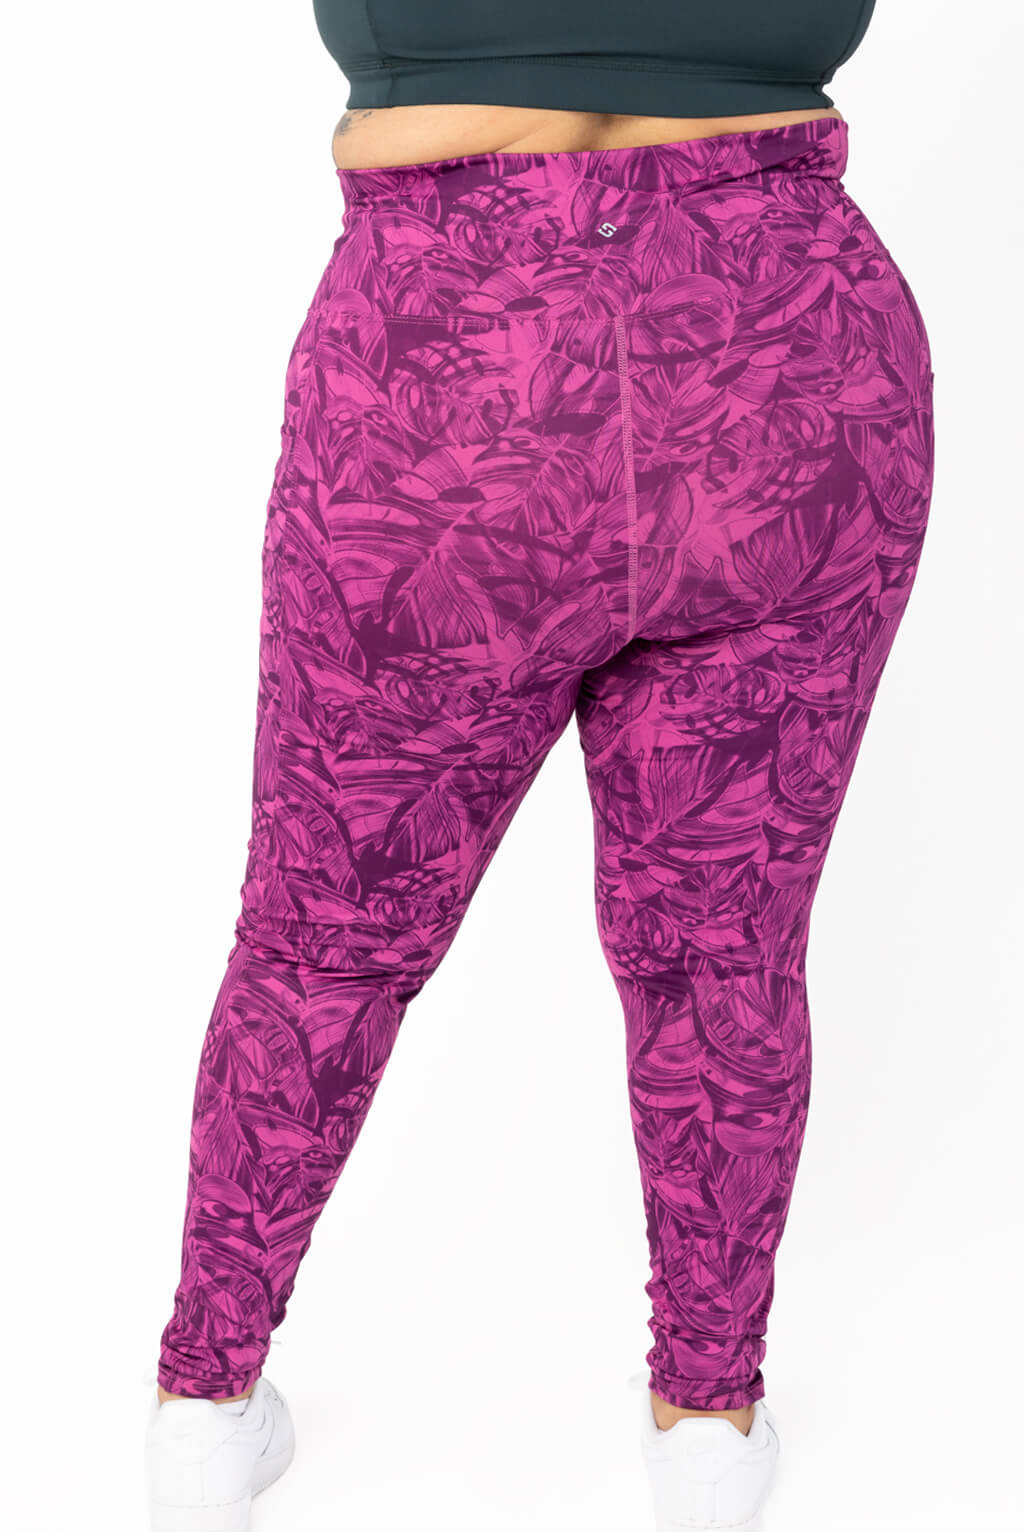 plus size leggings with pockets, back